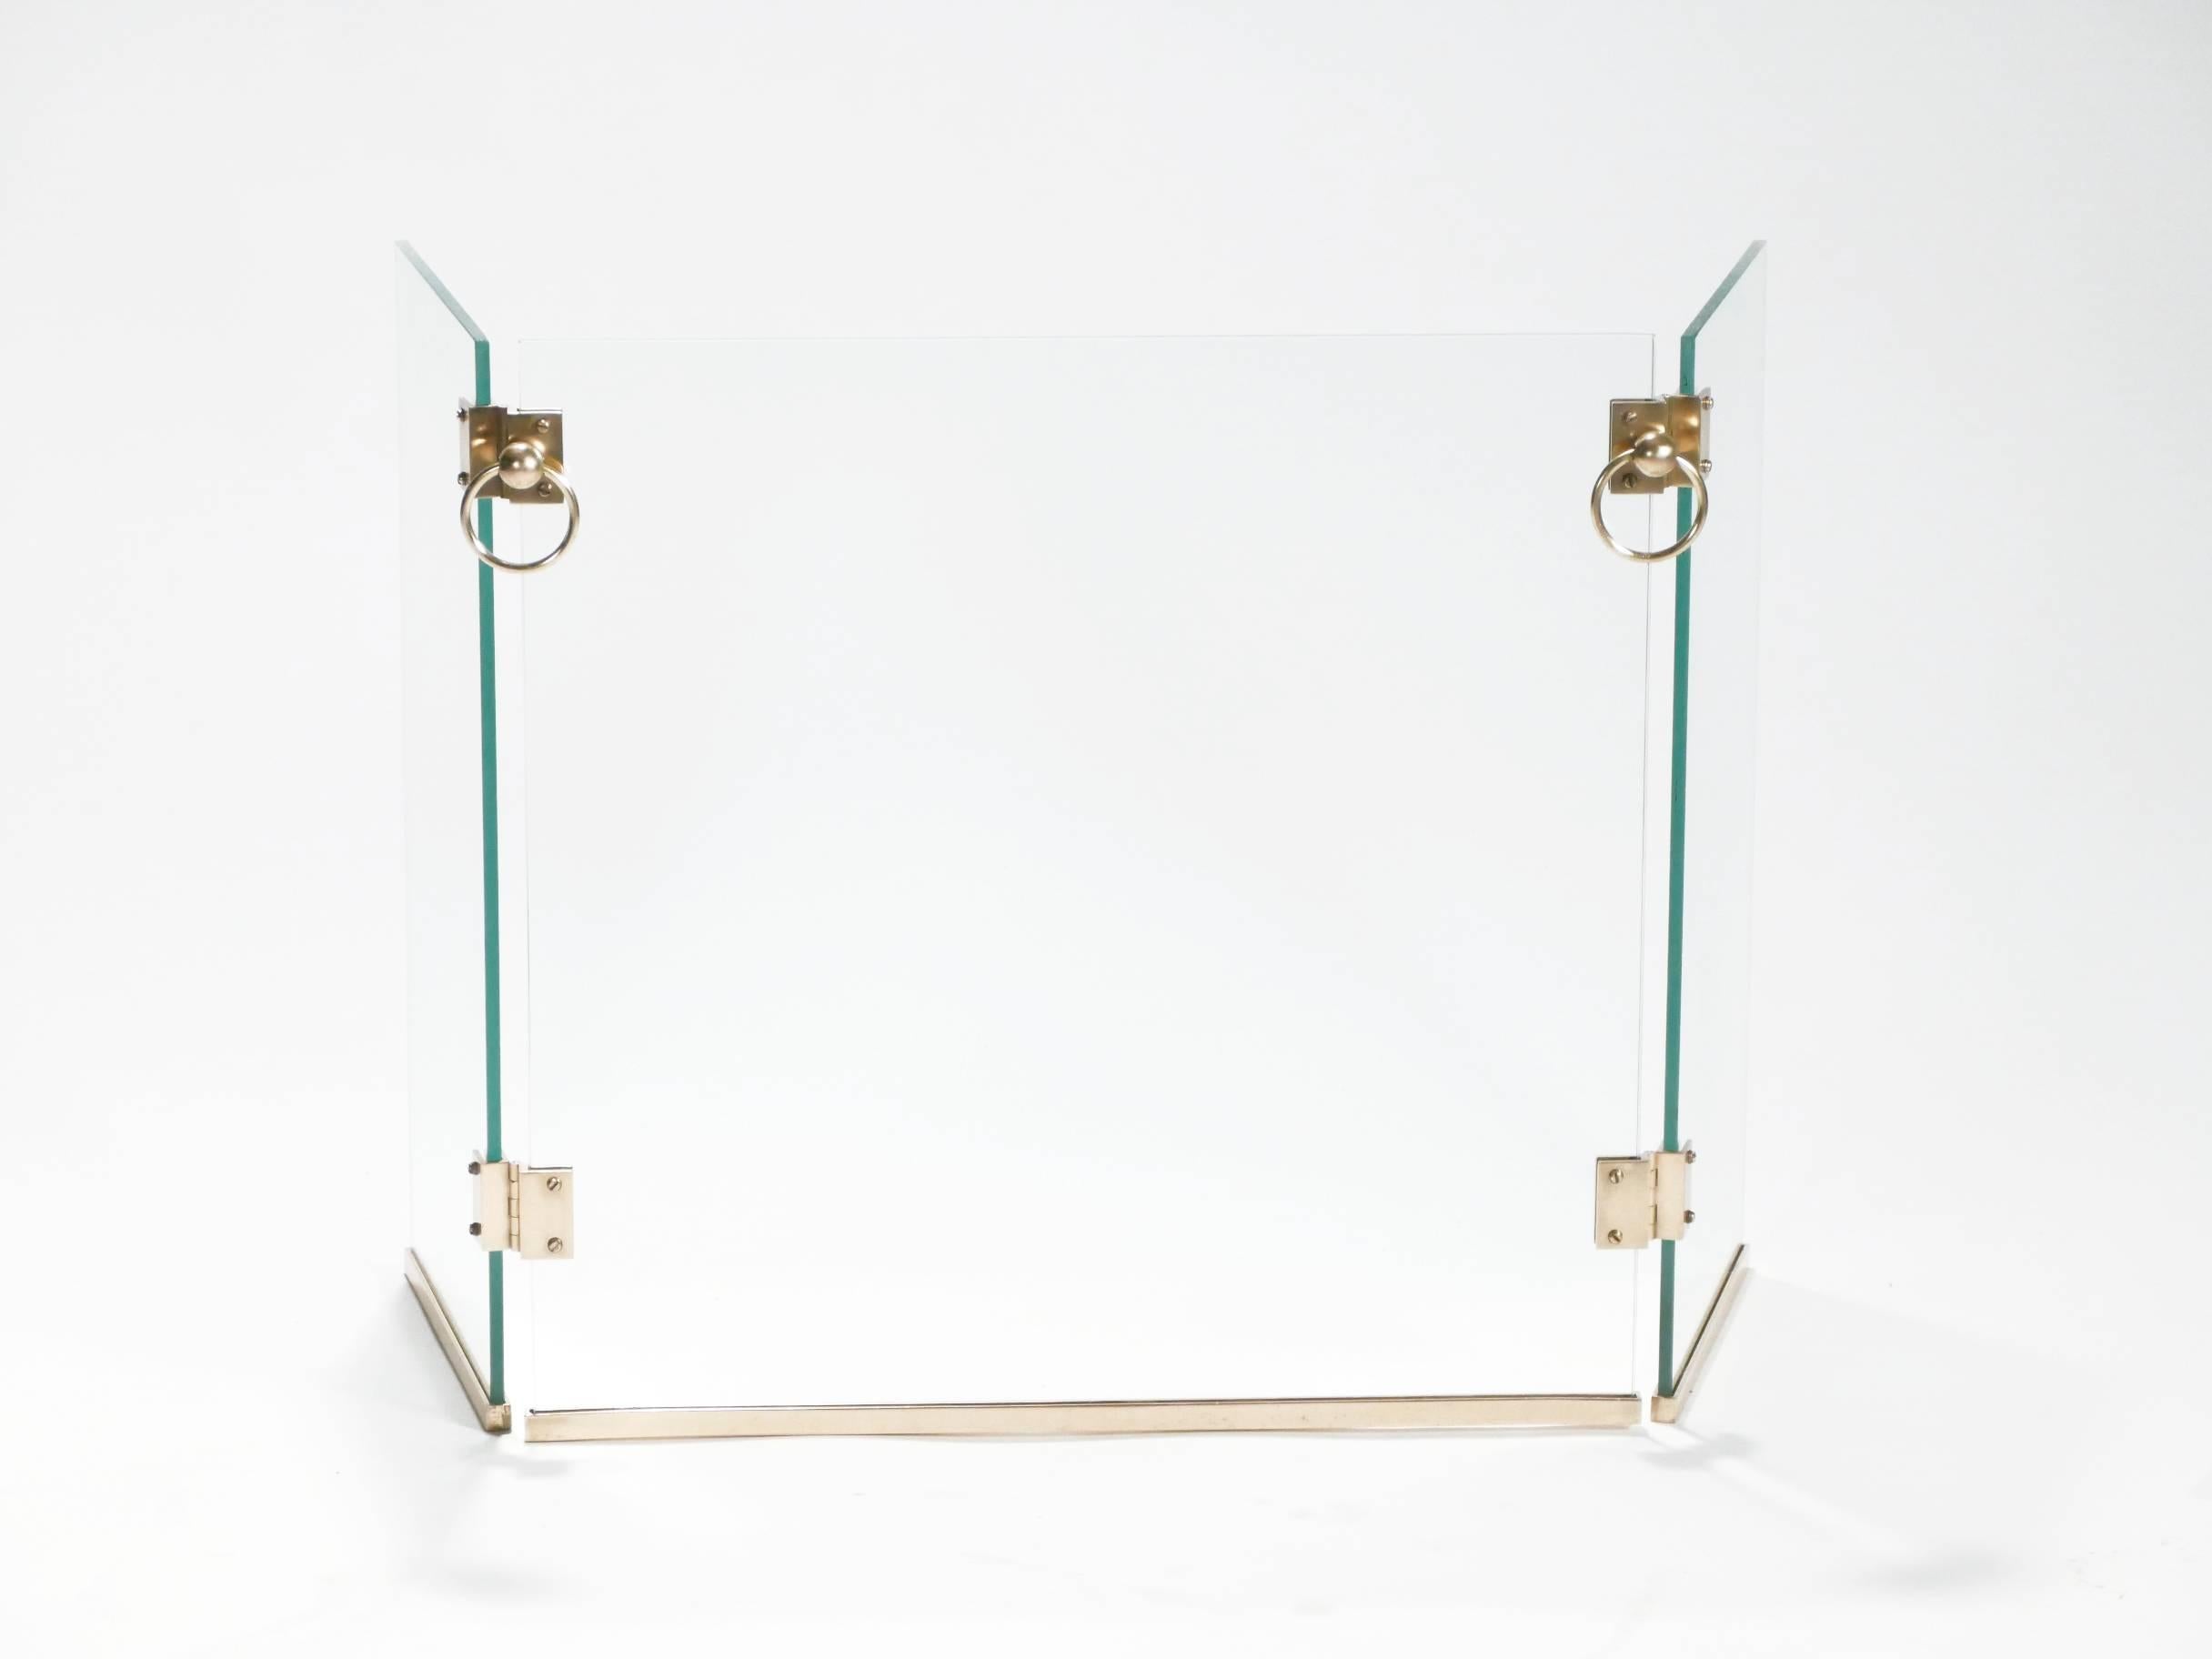 This sharp vintage fire screen is made with transparent glass from Saint Gobain, and quality brass. It’s a rare find and a highly decorative piece, designed by innovative French architect and designer Jacques Adnet in the 1940s. With warm brass